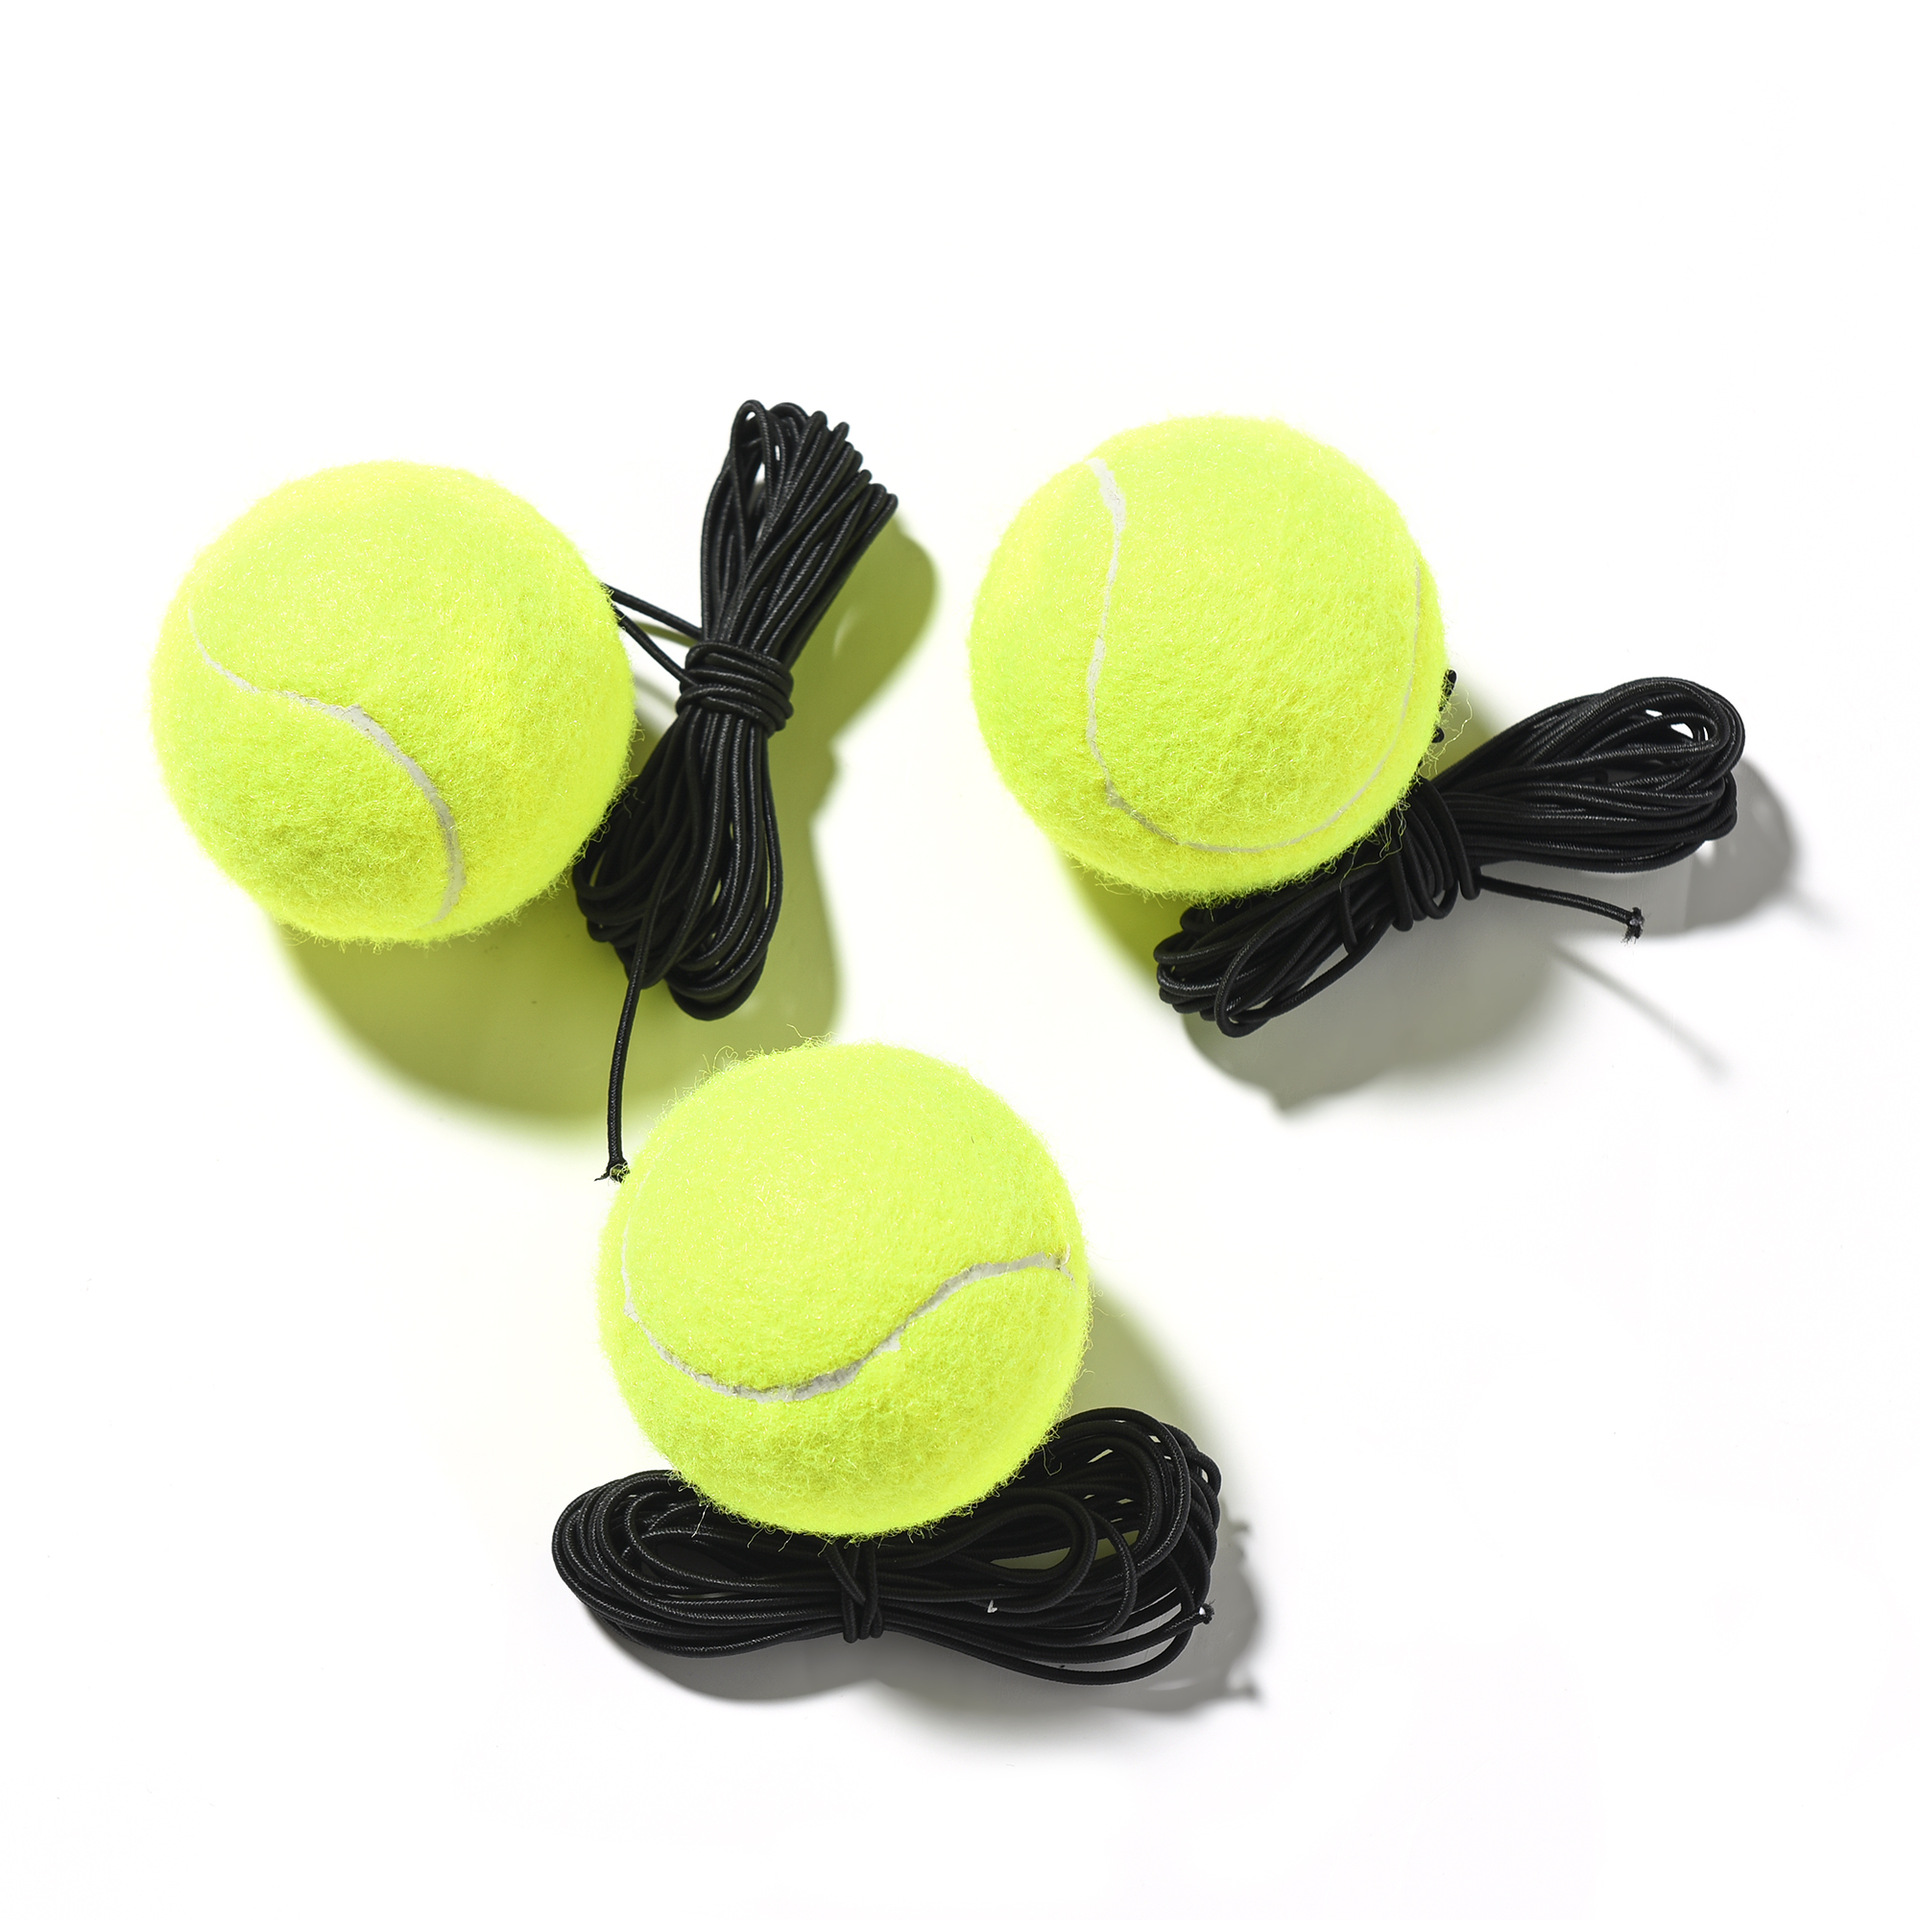 Large quantity and high price tennis ball with rope single person training high elastic and resistant tennis ball for sports